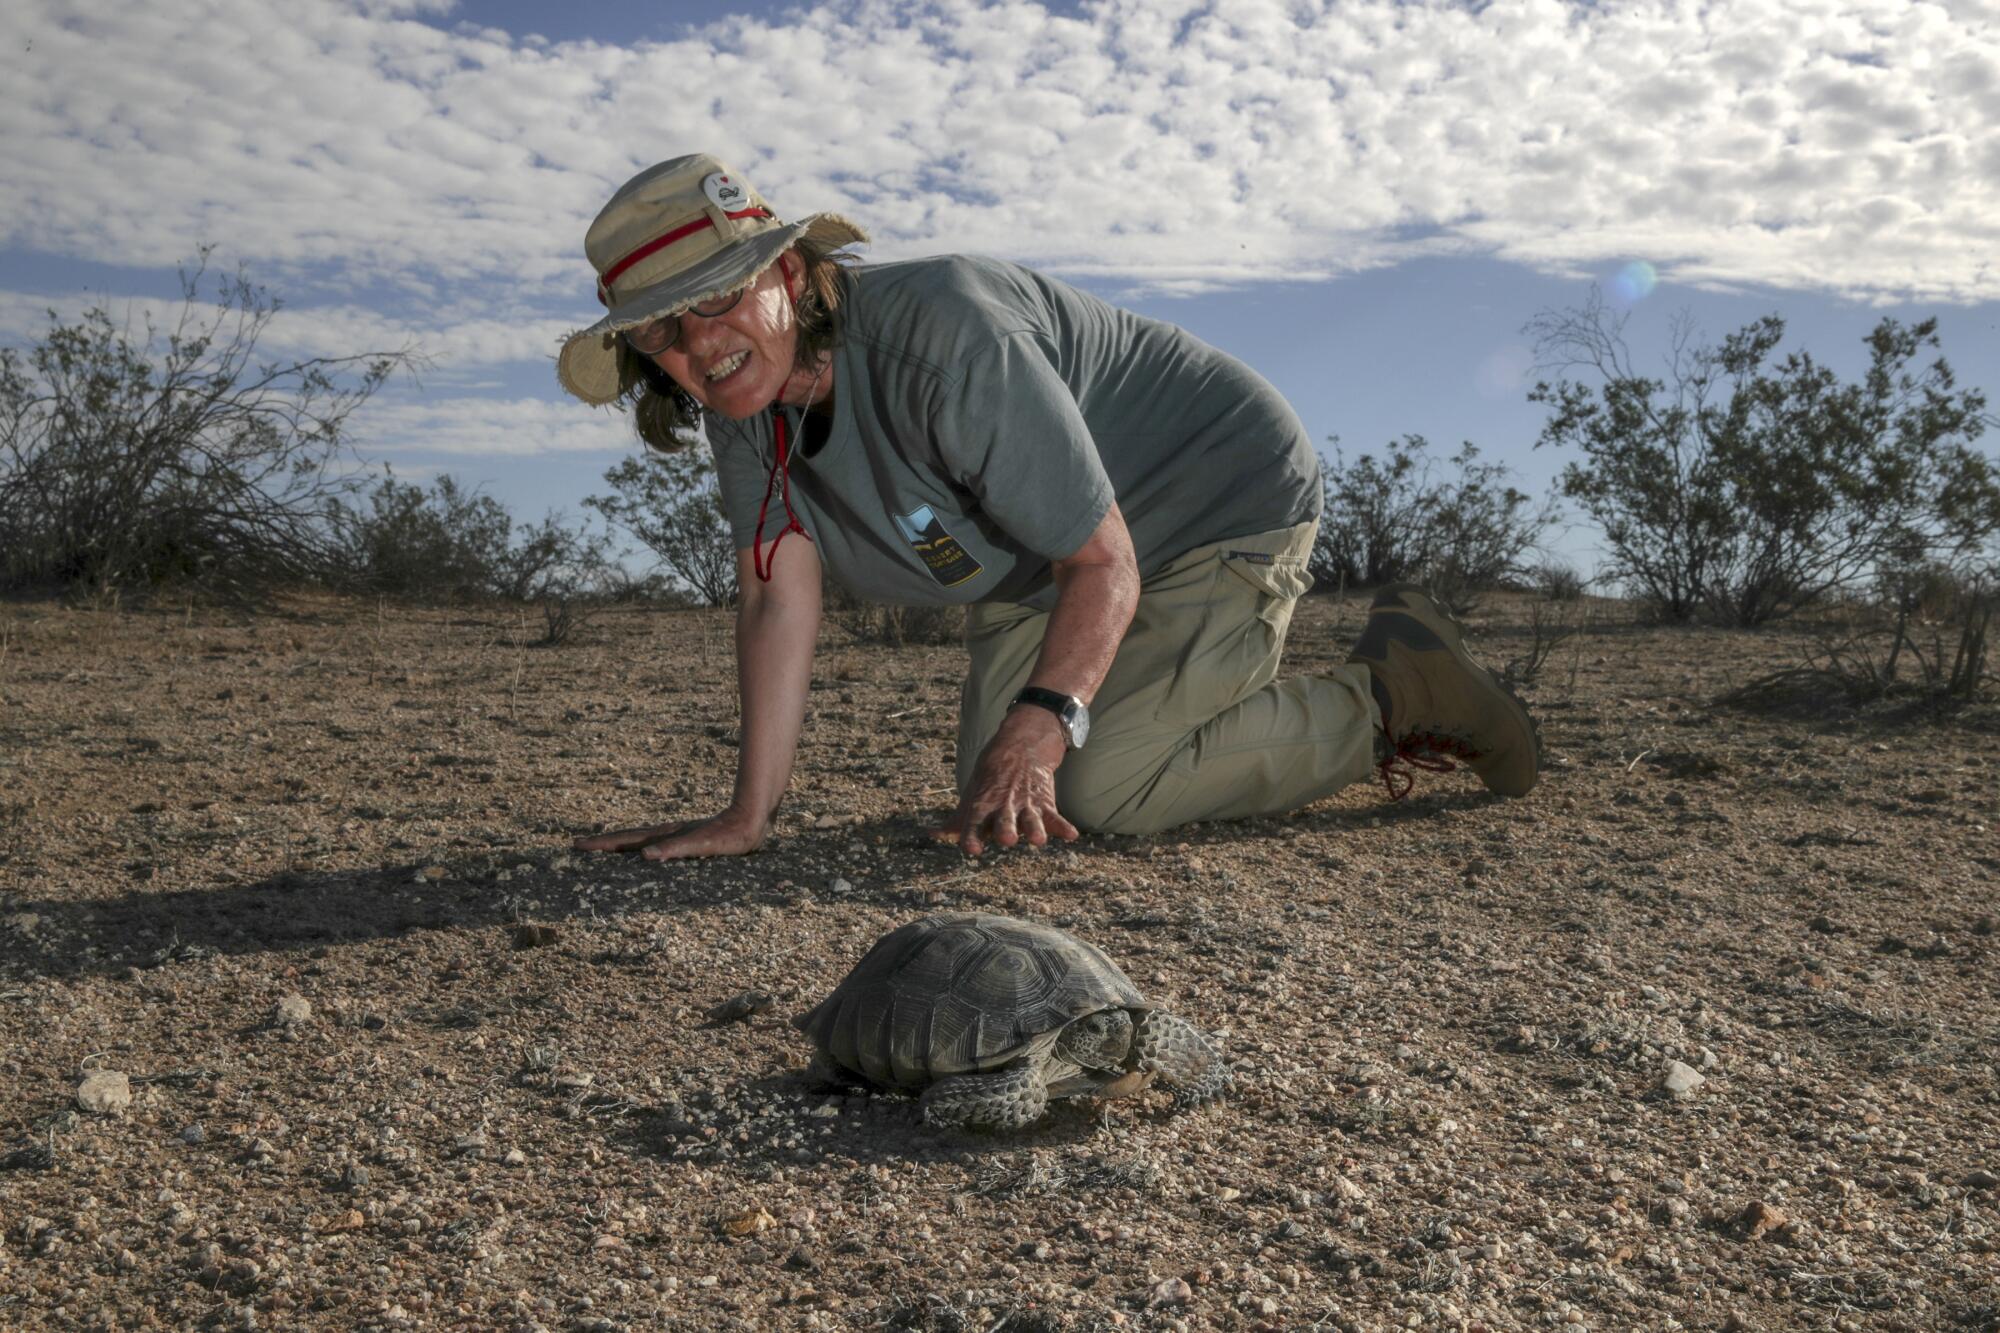 A researcher on hands and knees examines a desert tortoise in the wild.